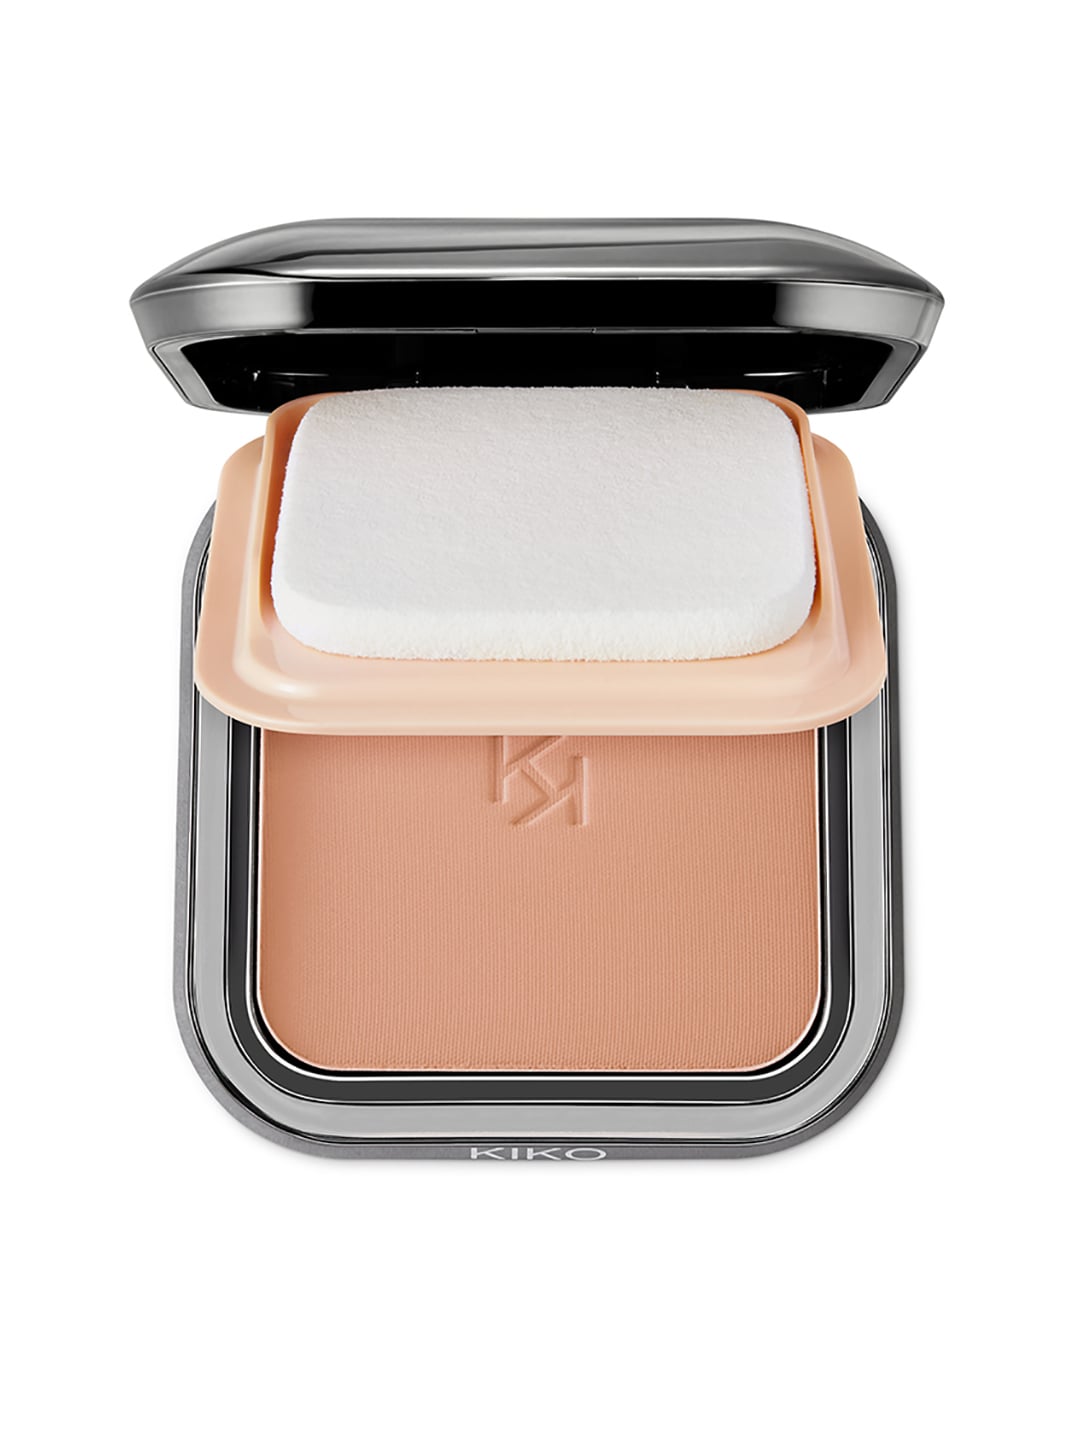 KIKO MILANO Weightless Perfection SPF 30 Wet and Dry Powder Foundation WR120 Price in India